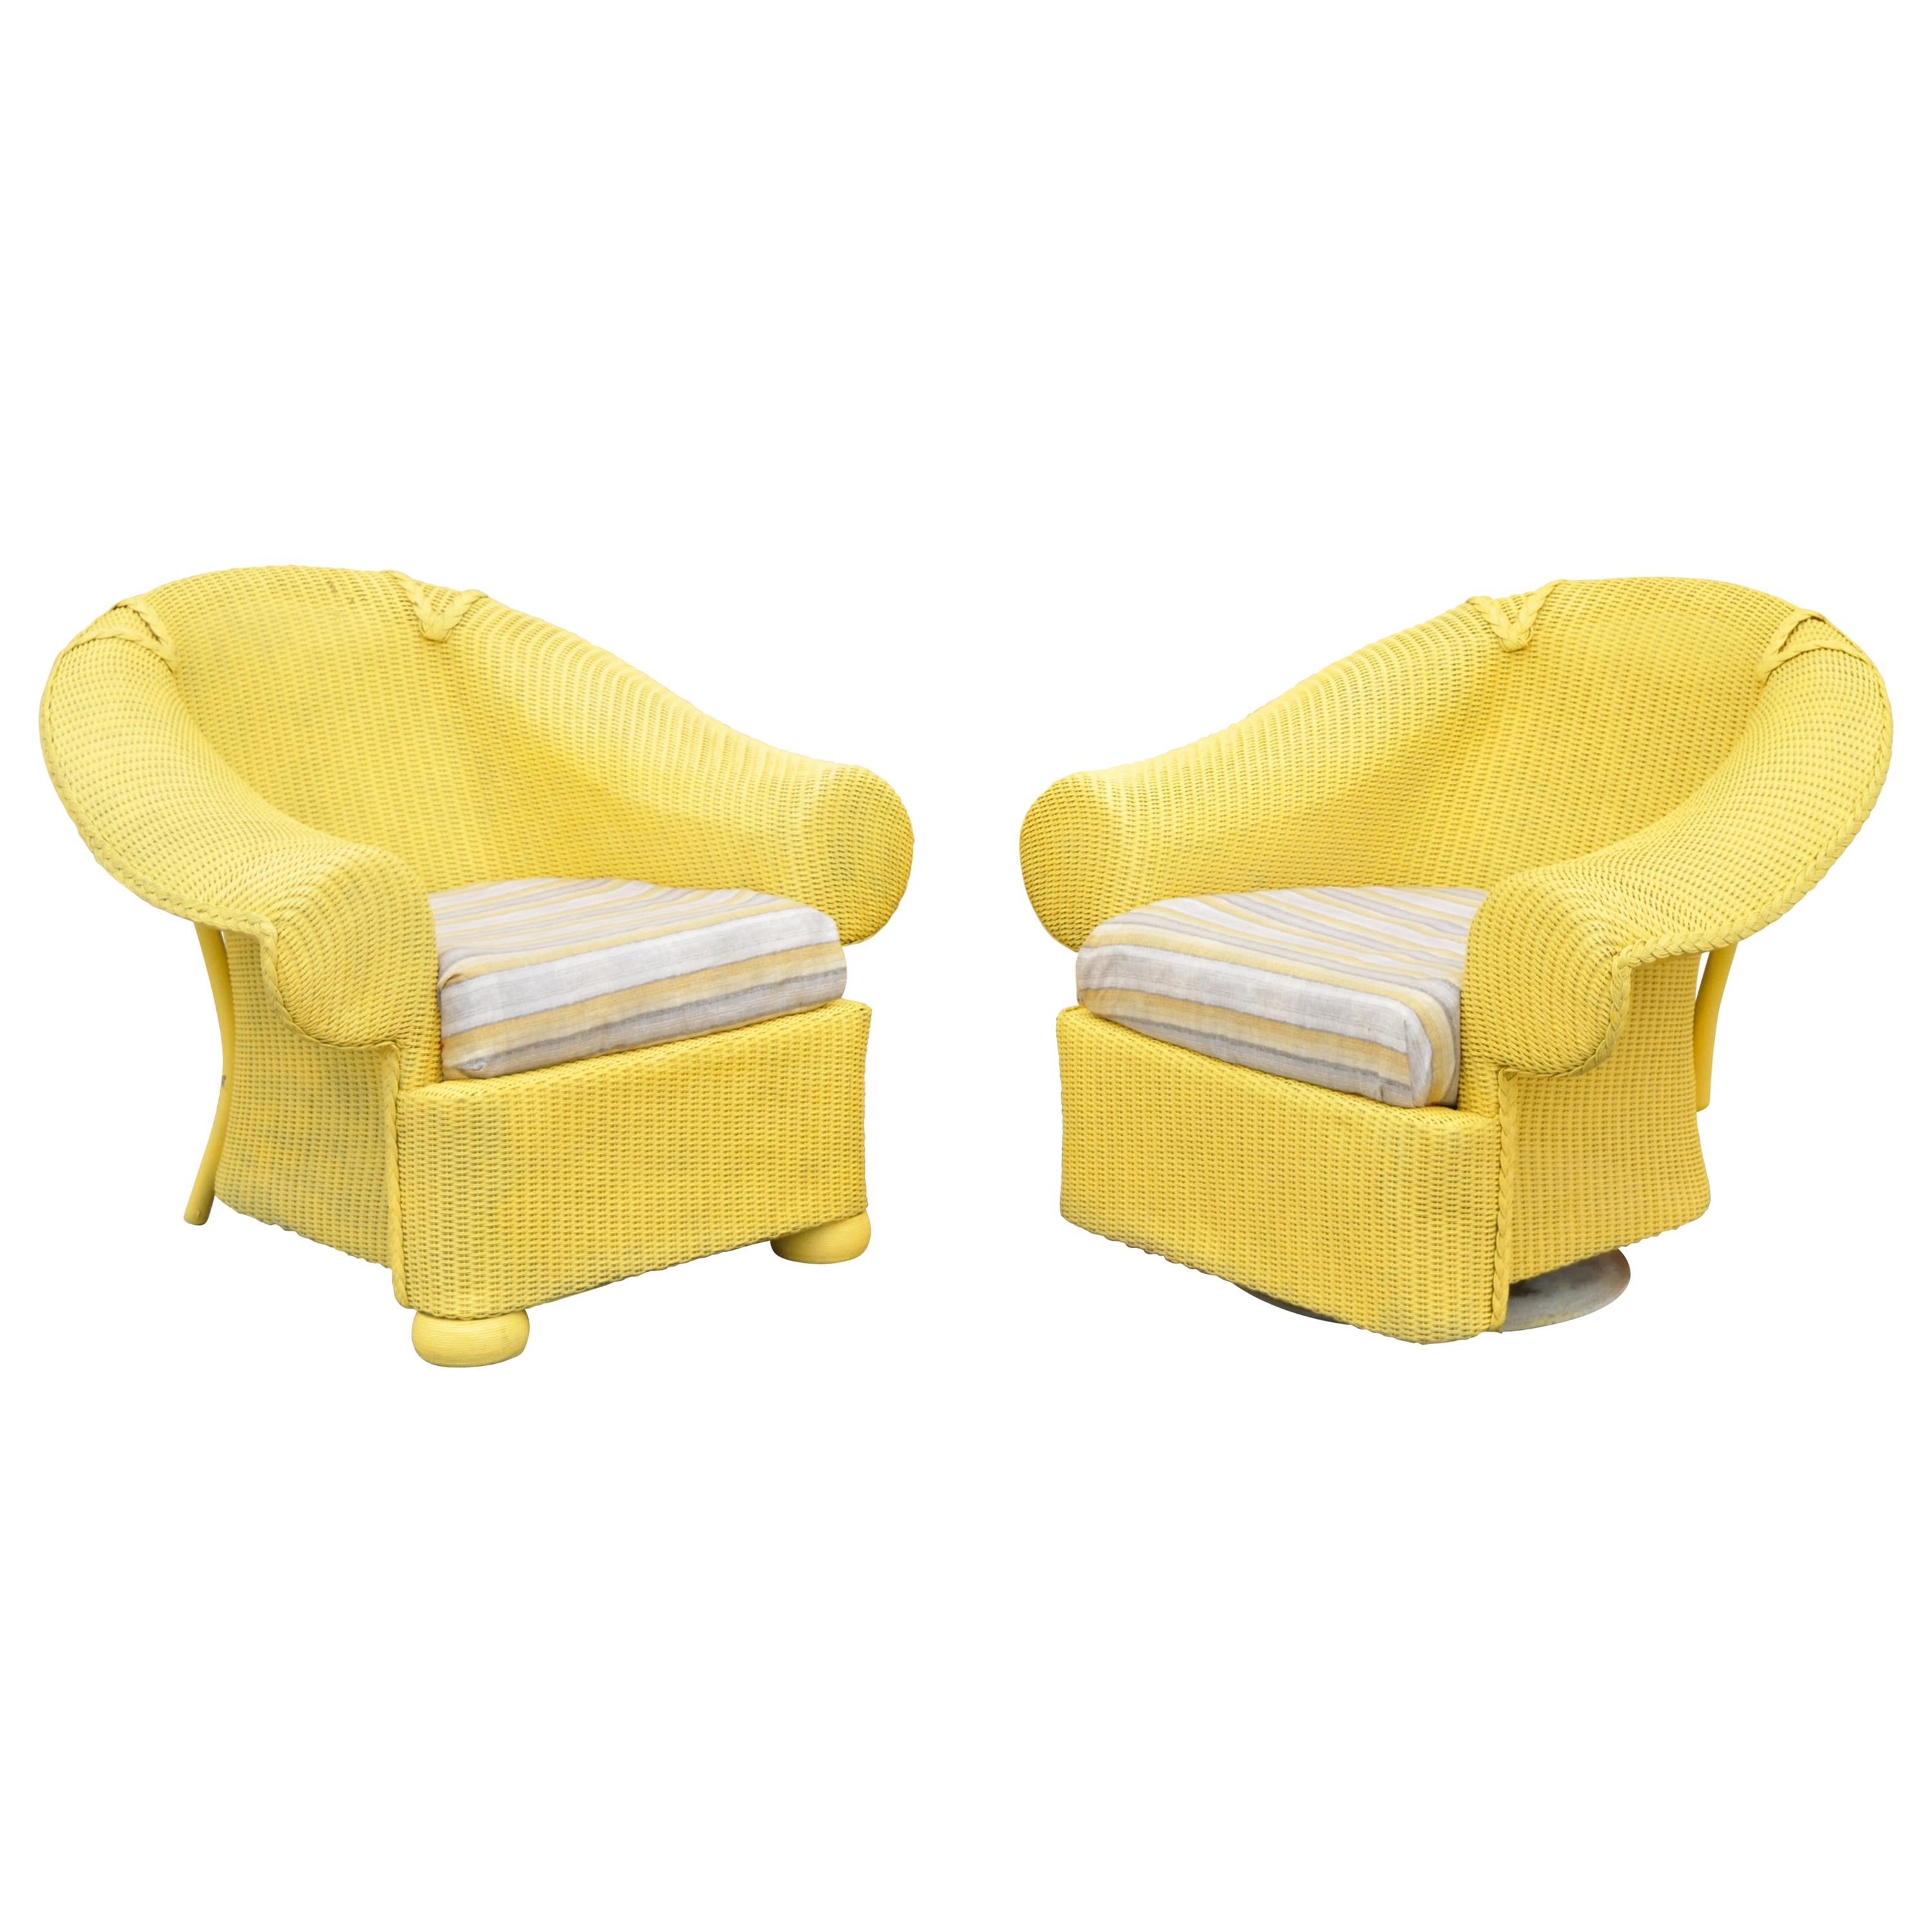 Lloyd Flanders Loom Yellow Wicker Large Oversize Sunroom Lounge Chairs, a Pair